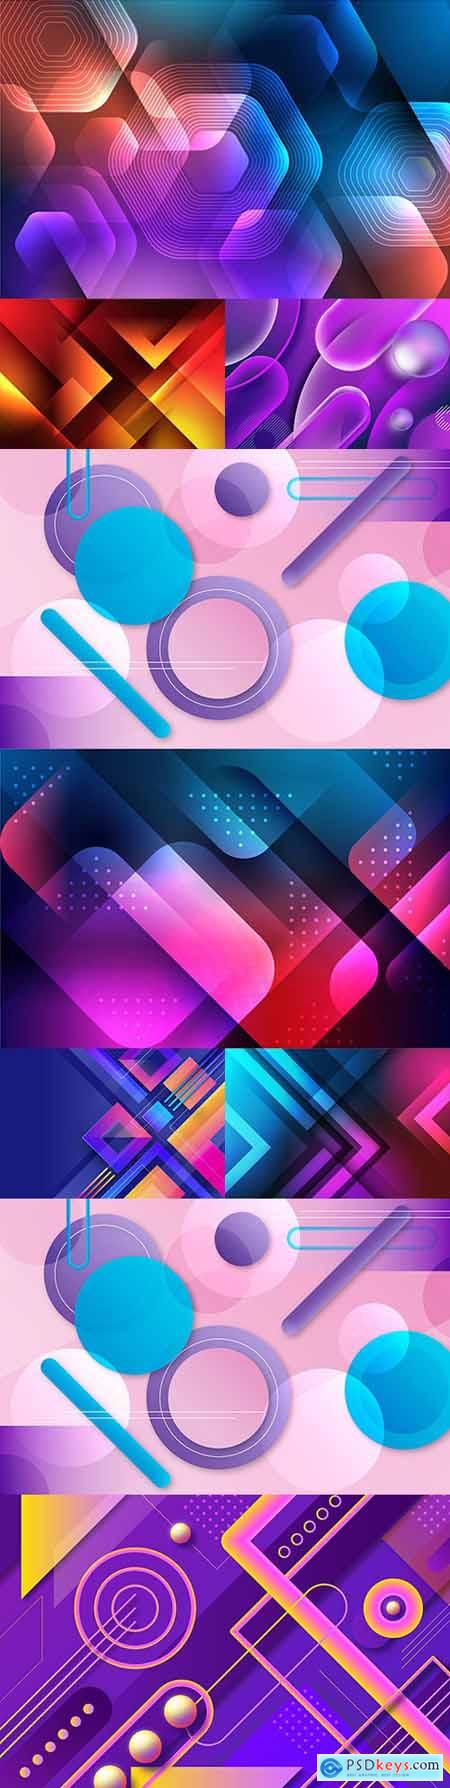 Gradient abstract design geometric background shape 2